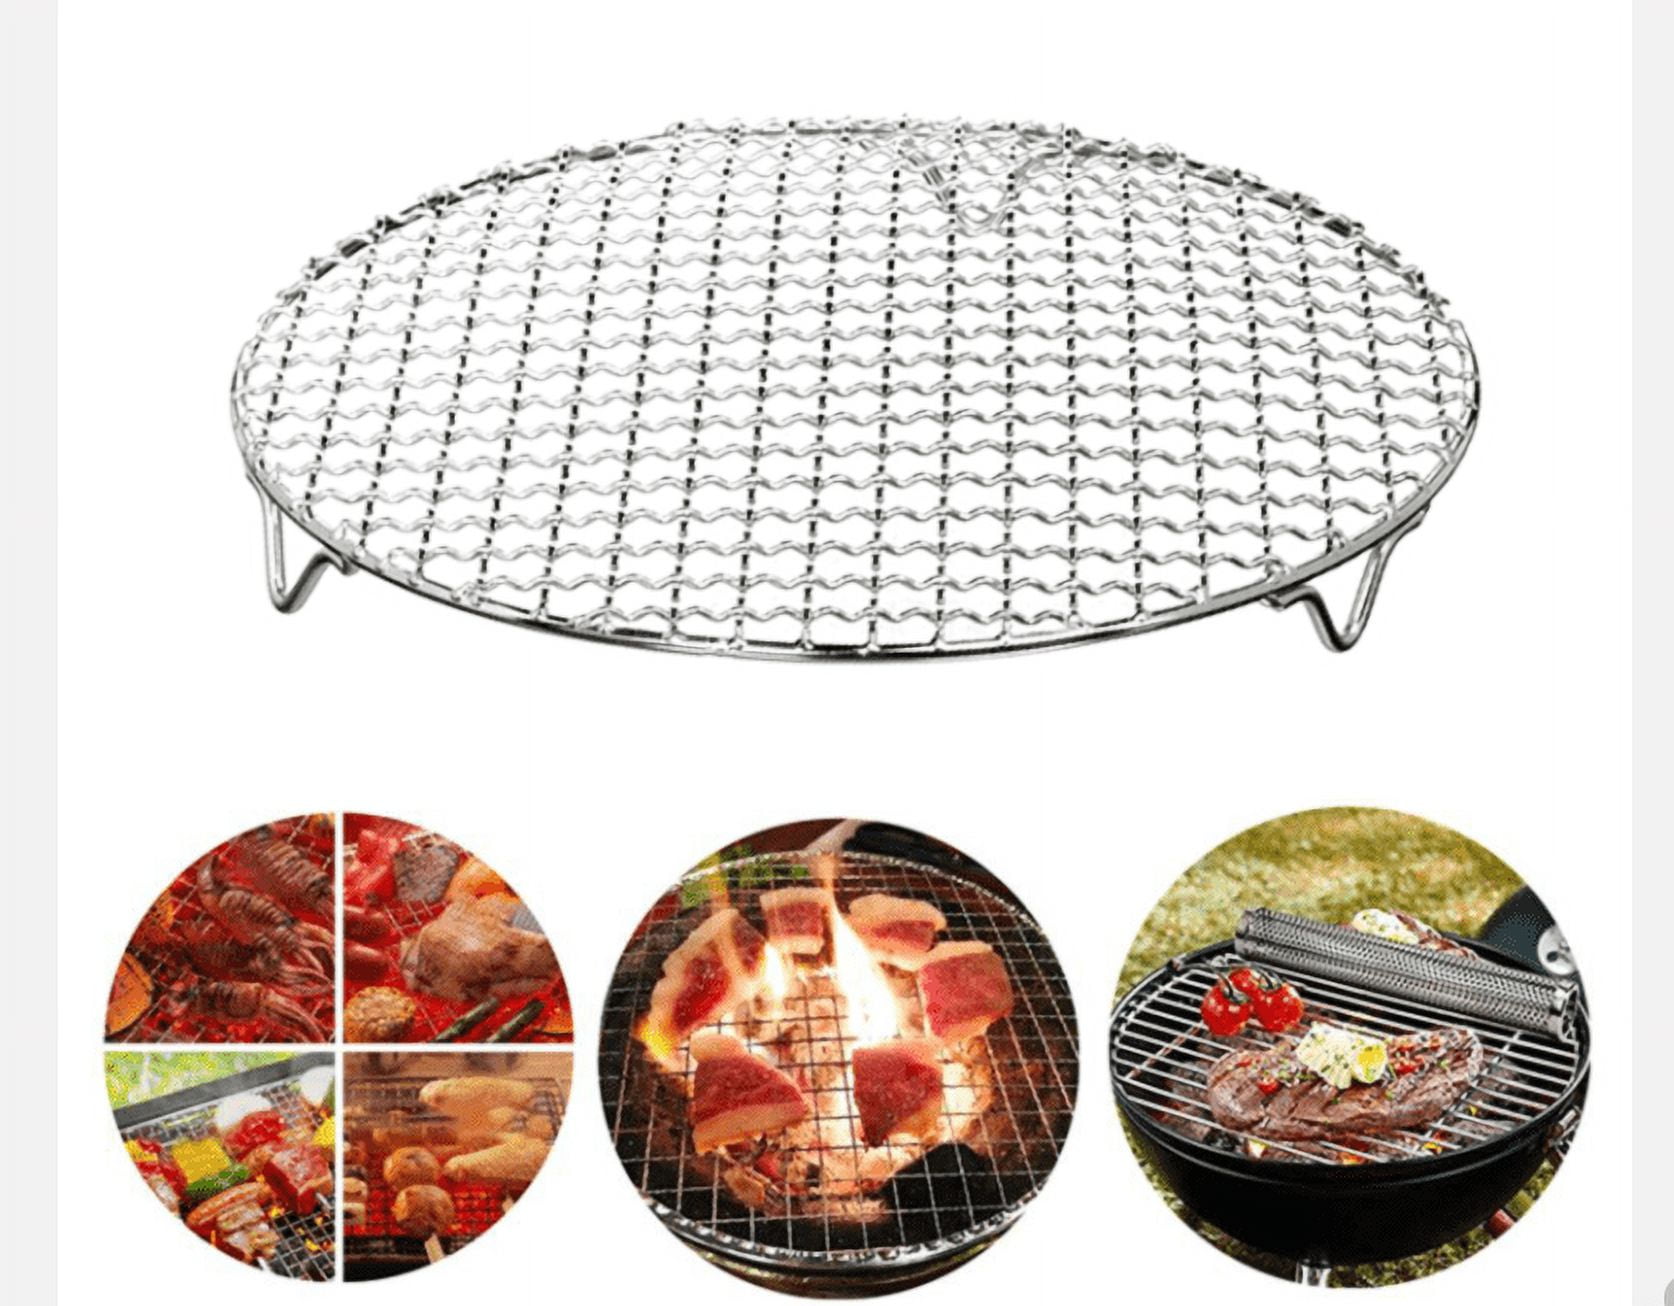  Stainless Steel Wire Cooling Rack-14x20-Ultra Heavy Duty,  Commercial Grade, Extra Large-Cool Cookies, Cakes & Bread-Perfect for Baking  Meat & Bacon-Fits 3/4 Big Sheet Pan-Oven & Dishwasher Safe: Home & Kitchen